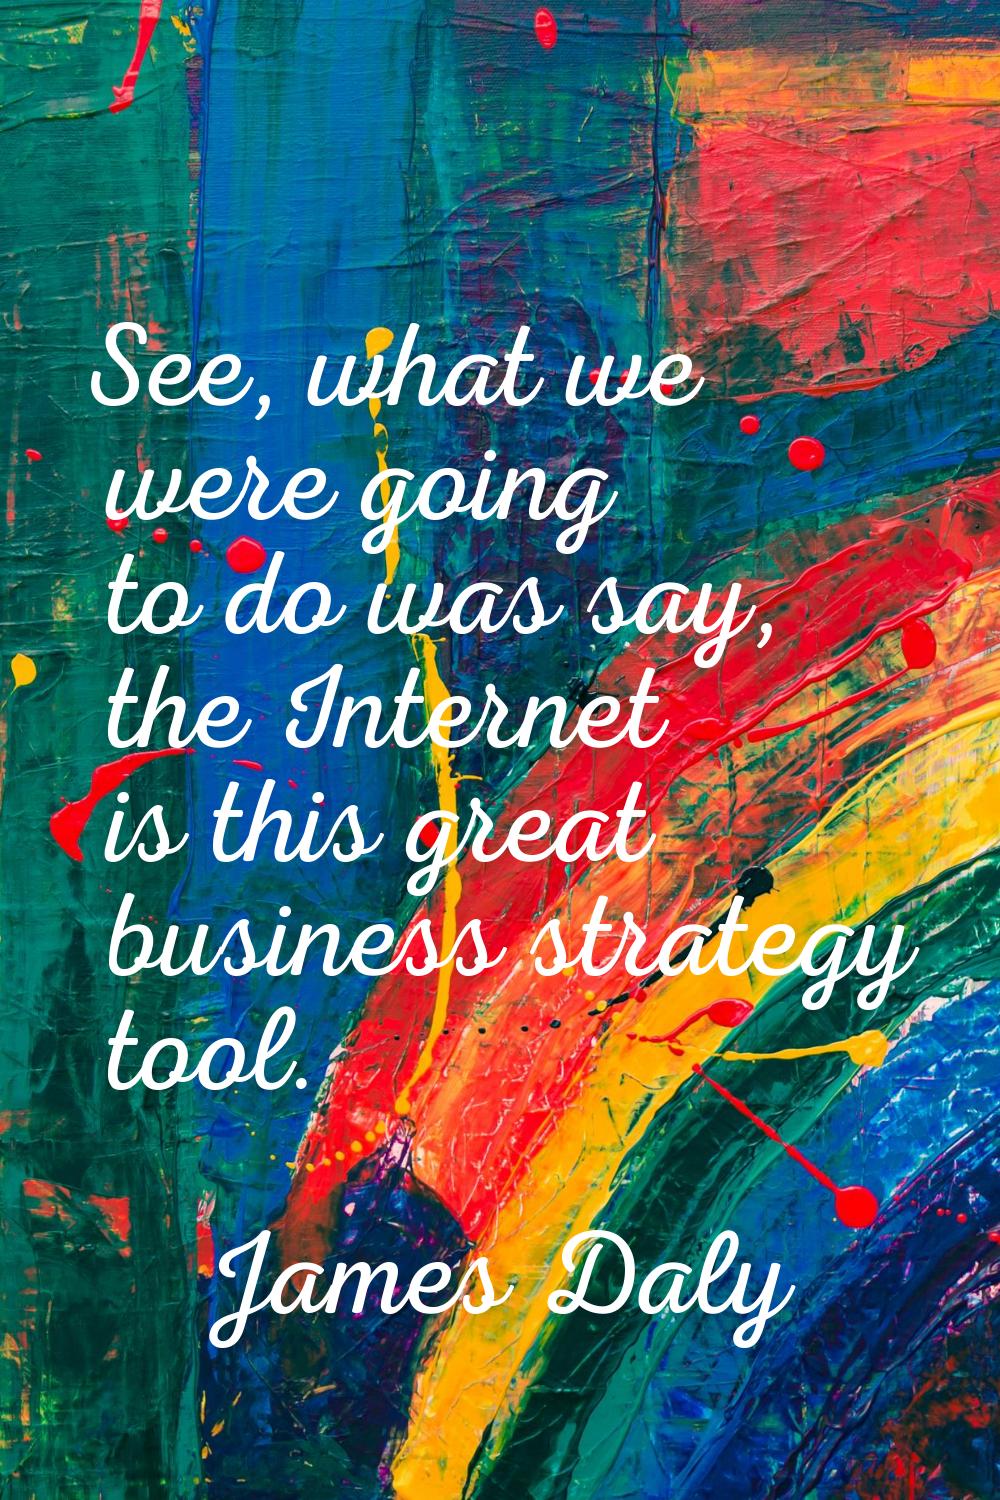 See, what we were going to do was say, the Internet is this great business strategy tool.